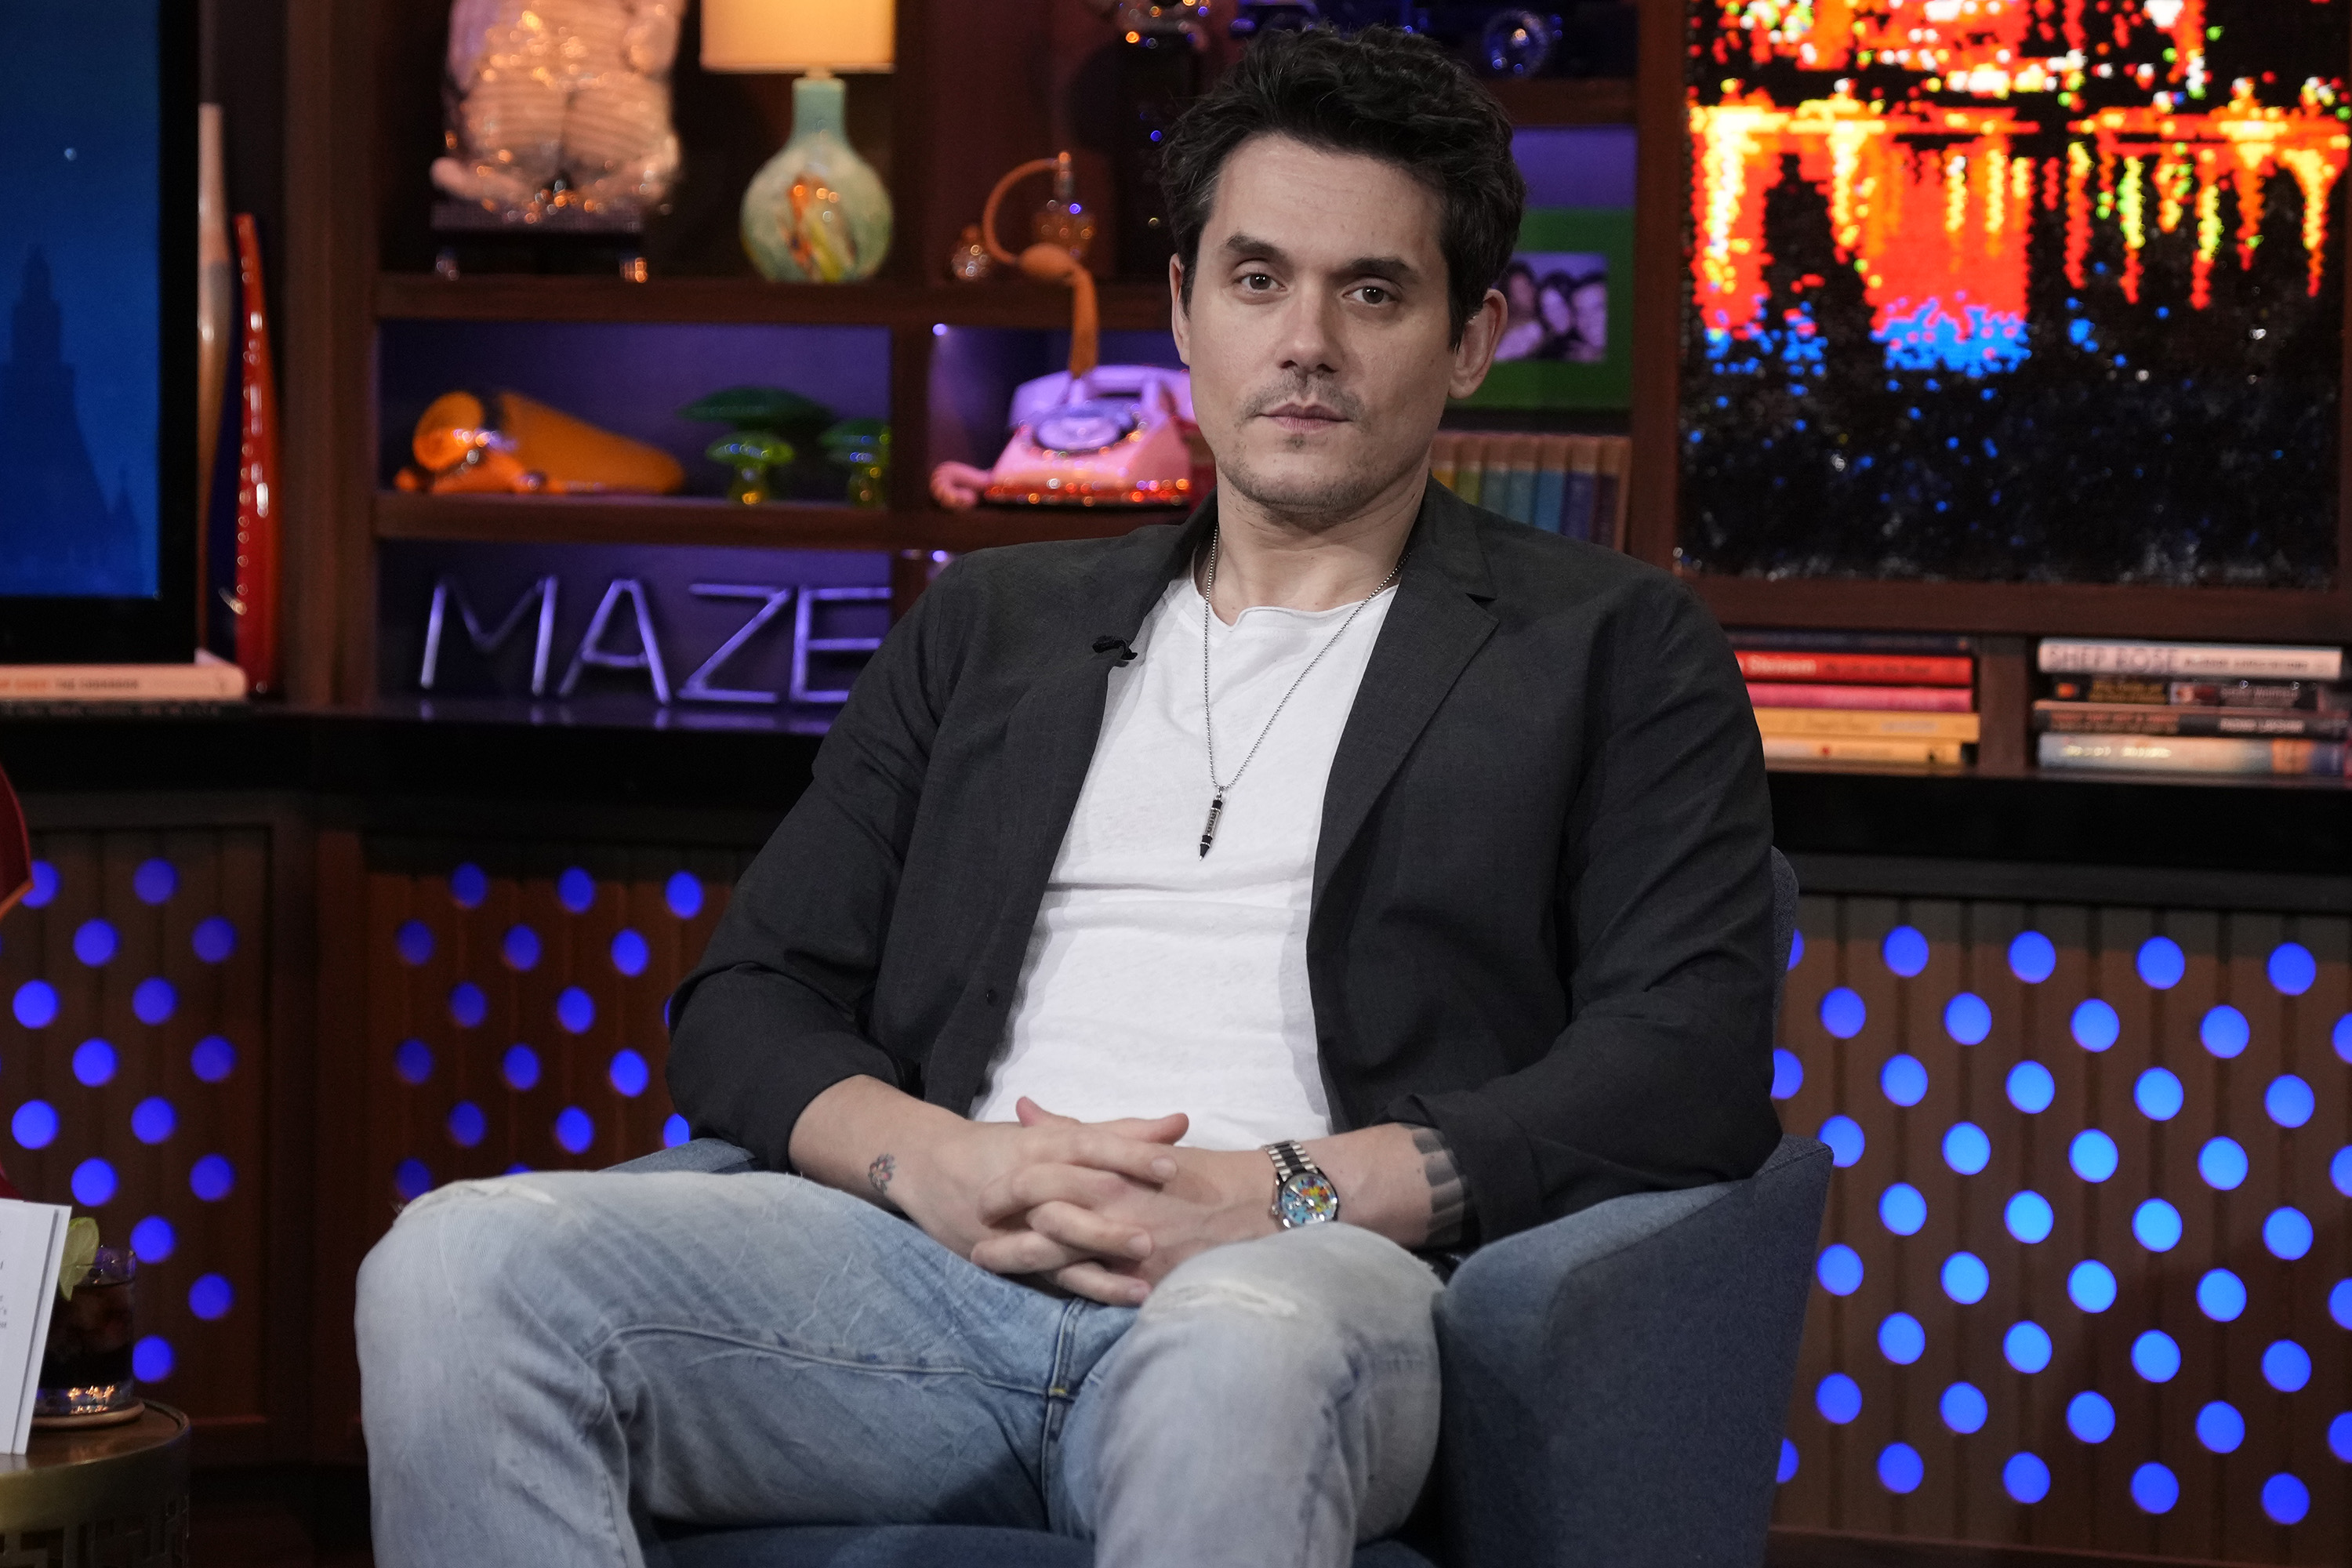 'I so badly want to get married', John Mayer said in January 2024 interview